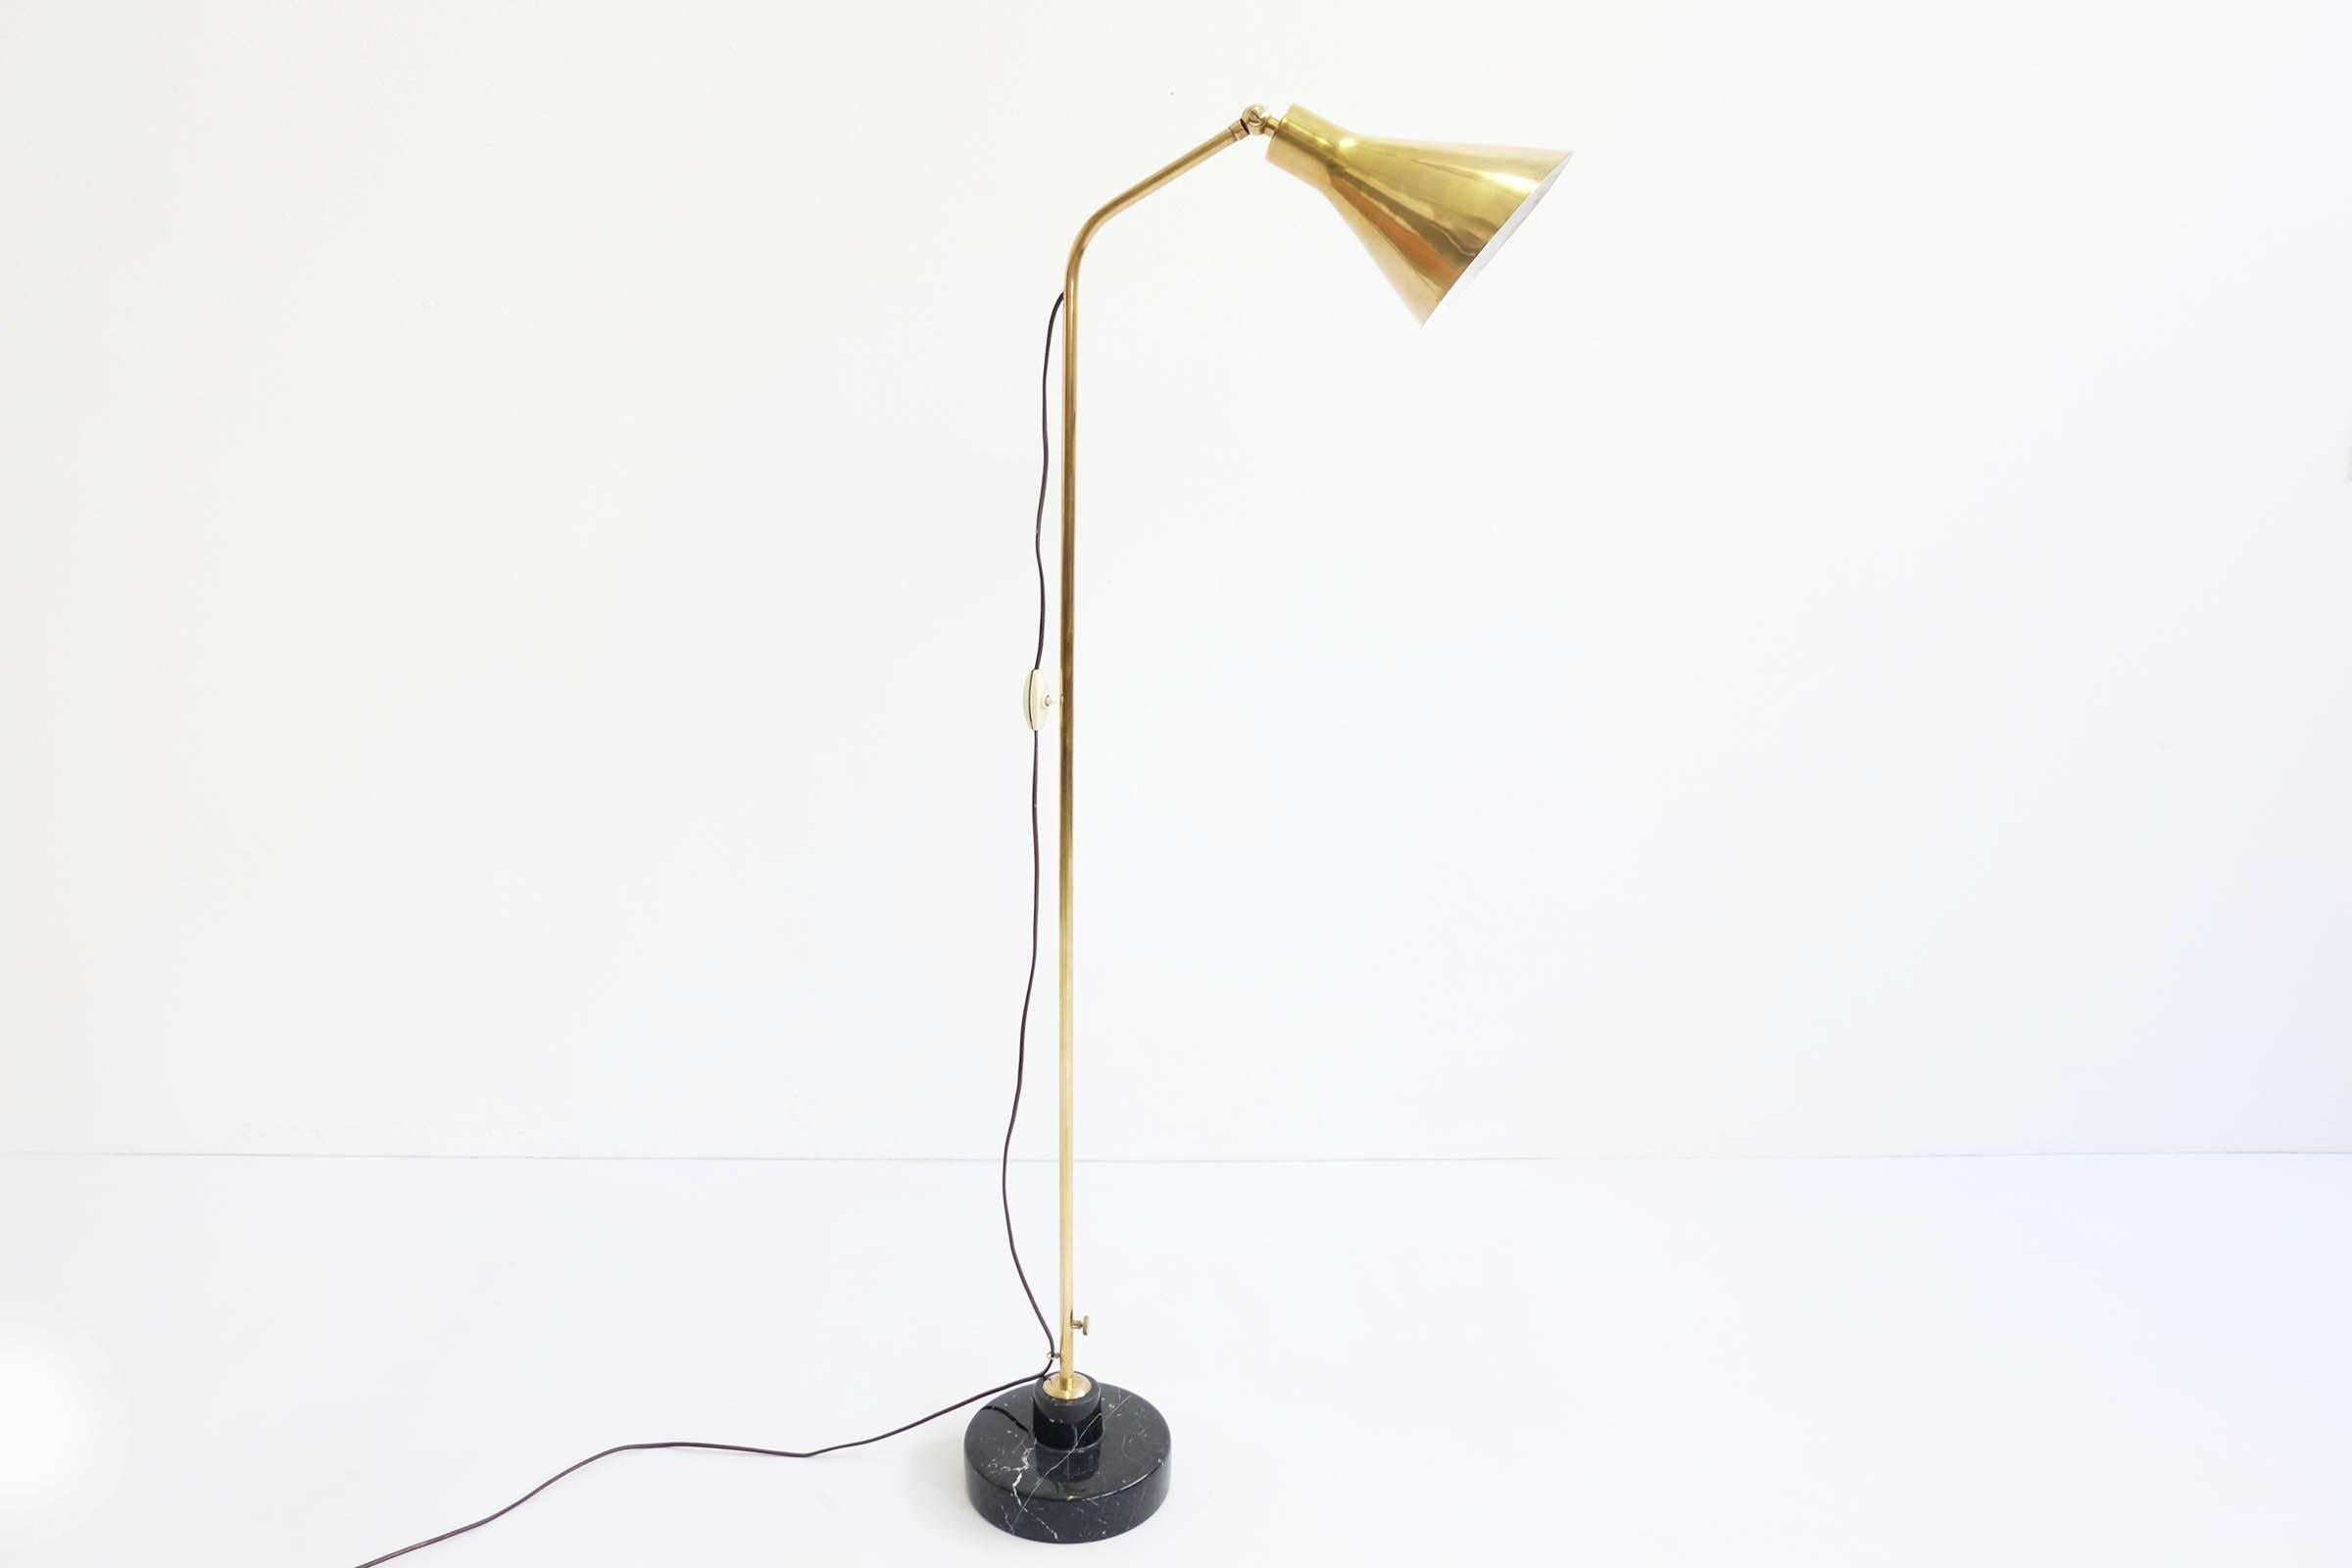 Early production and totally original floor lamp

Measure: Extendable with a spotting Scope from 120 to 190 HT cm
Shade diameter 17 cm
Marble base diameter 20 cm.